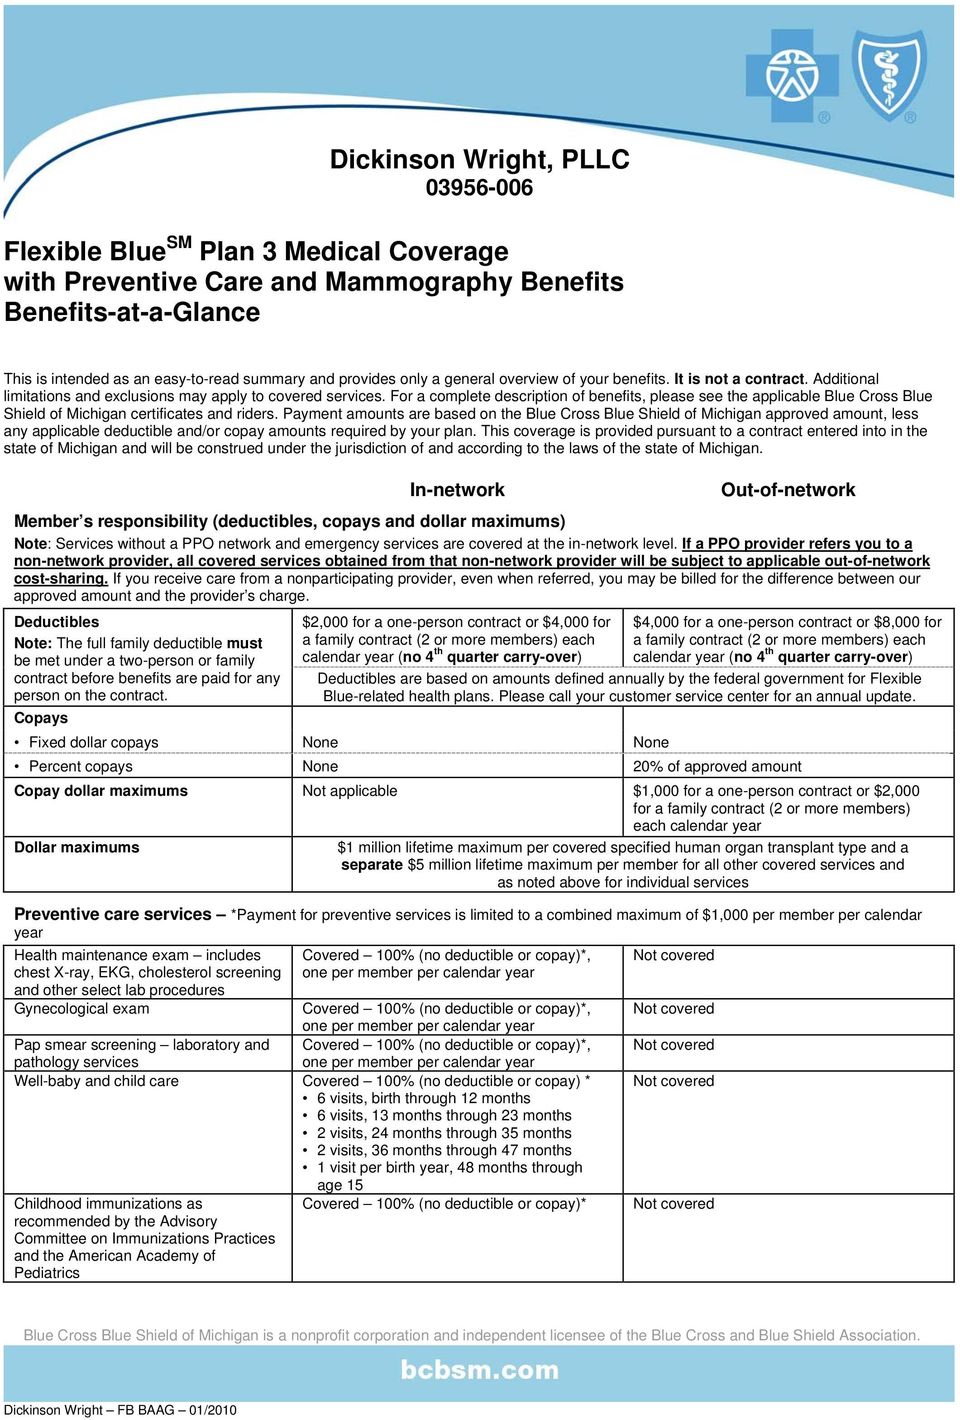 For a complete description of benefits, please see the applicable Blue Cross Blue Shield of Michigan certificates and riders.